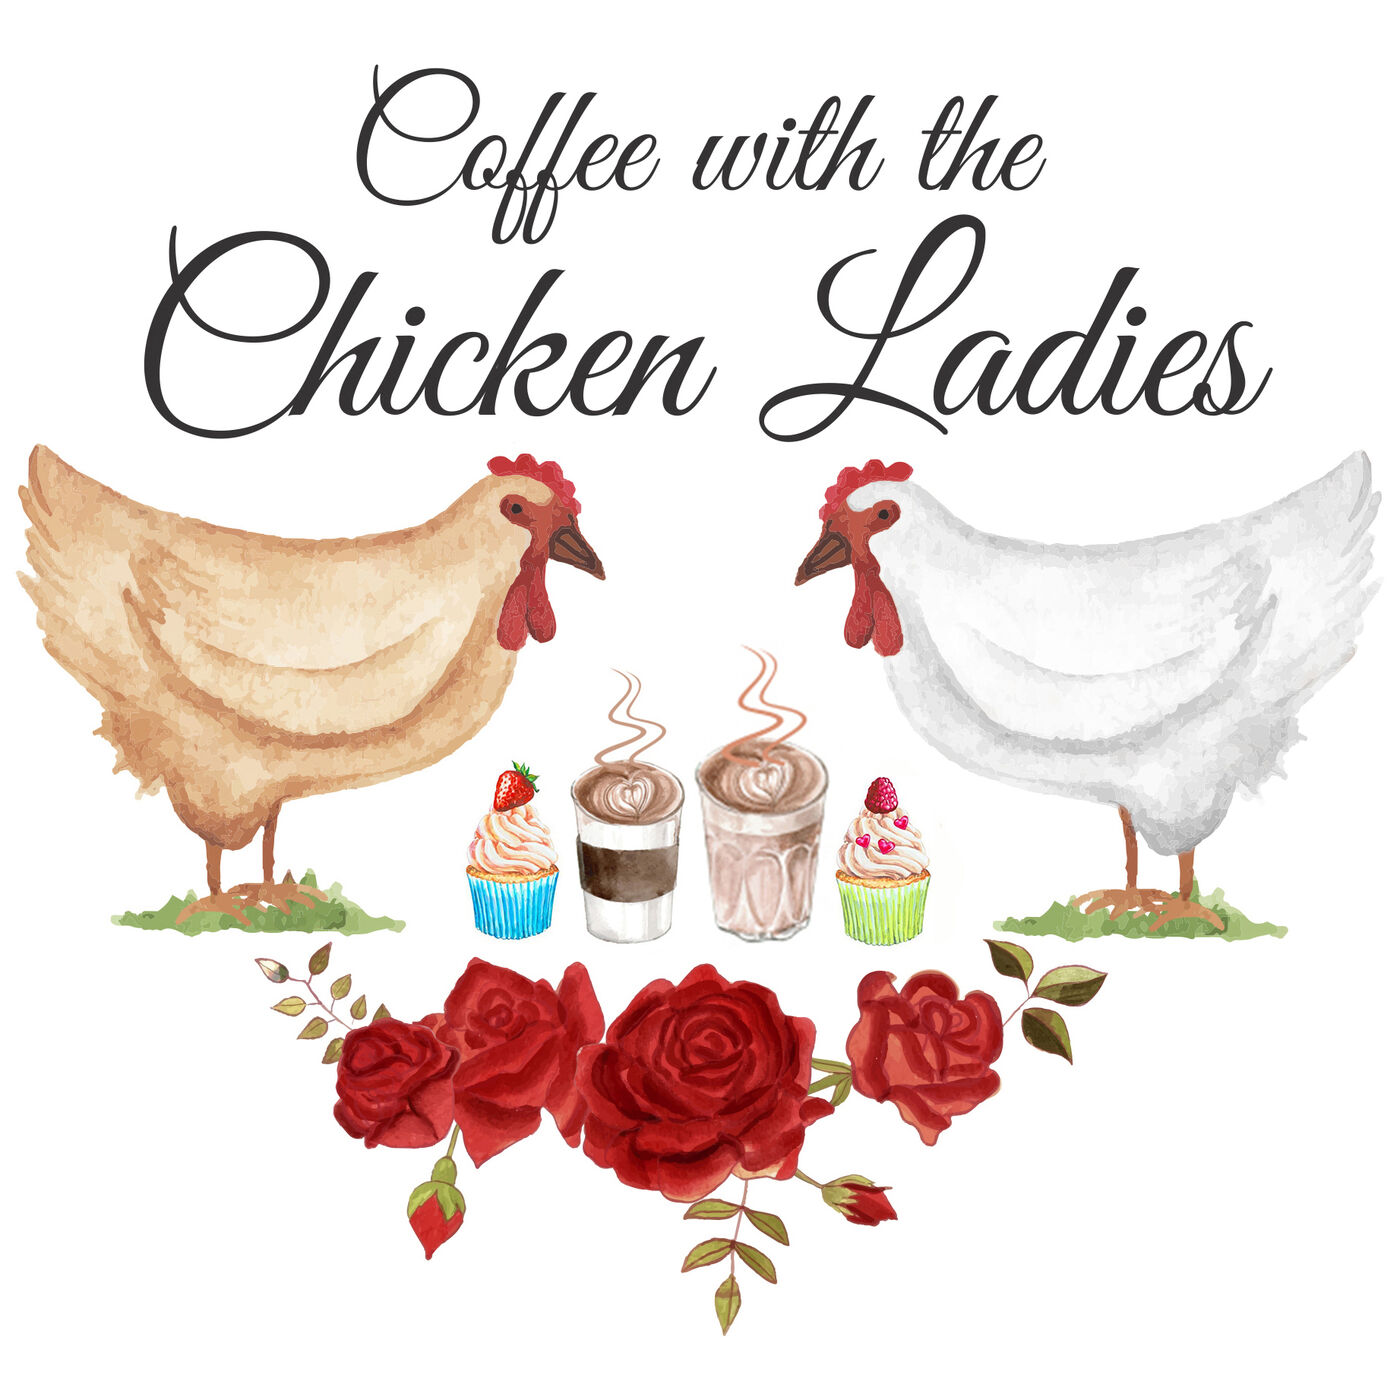 Coffee with the Chicken Ladies Podcast